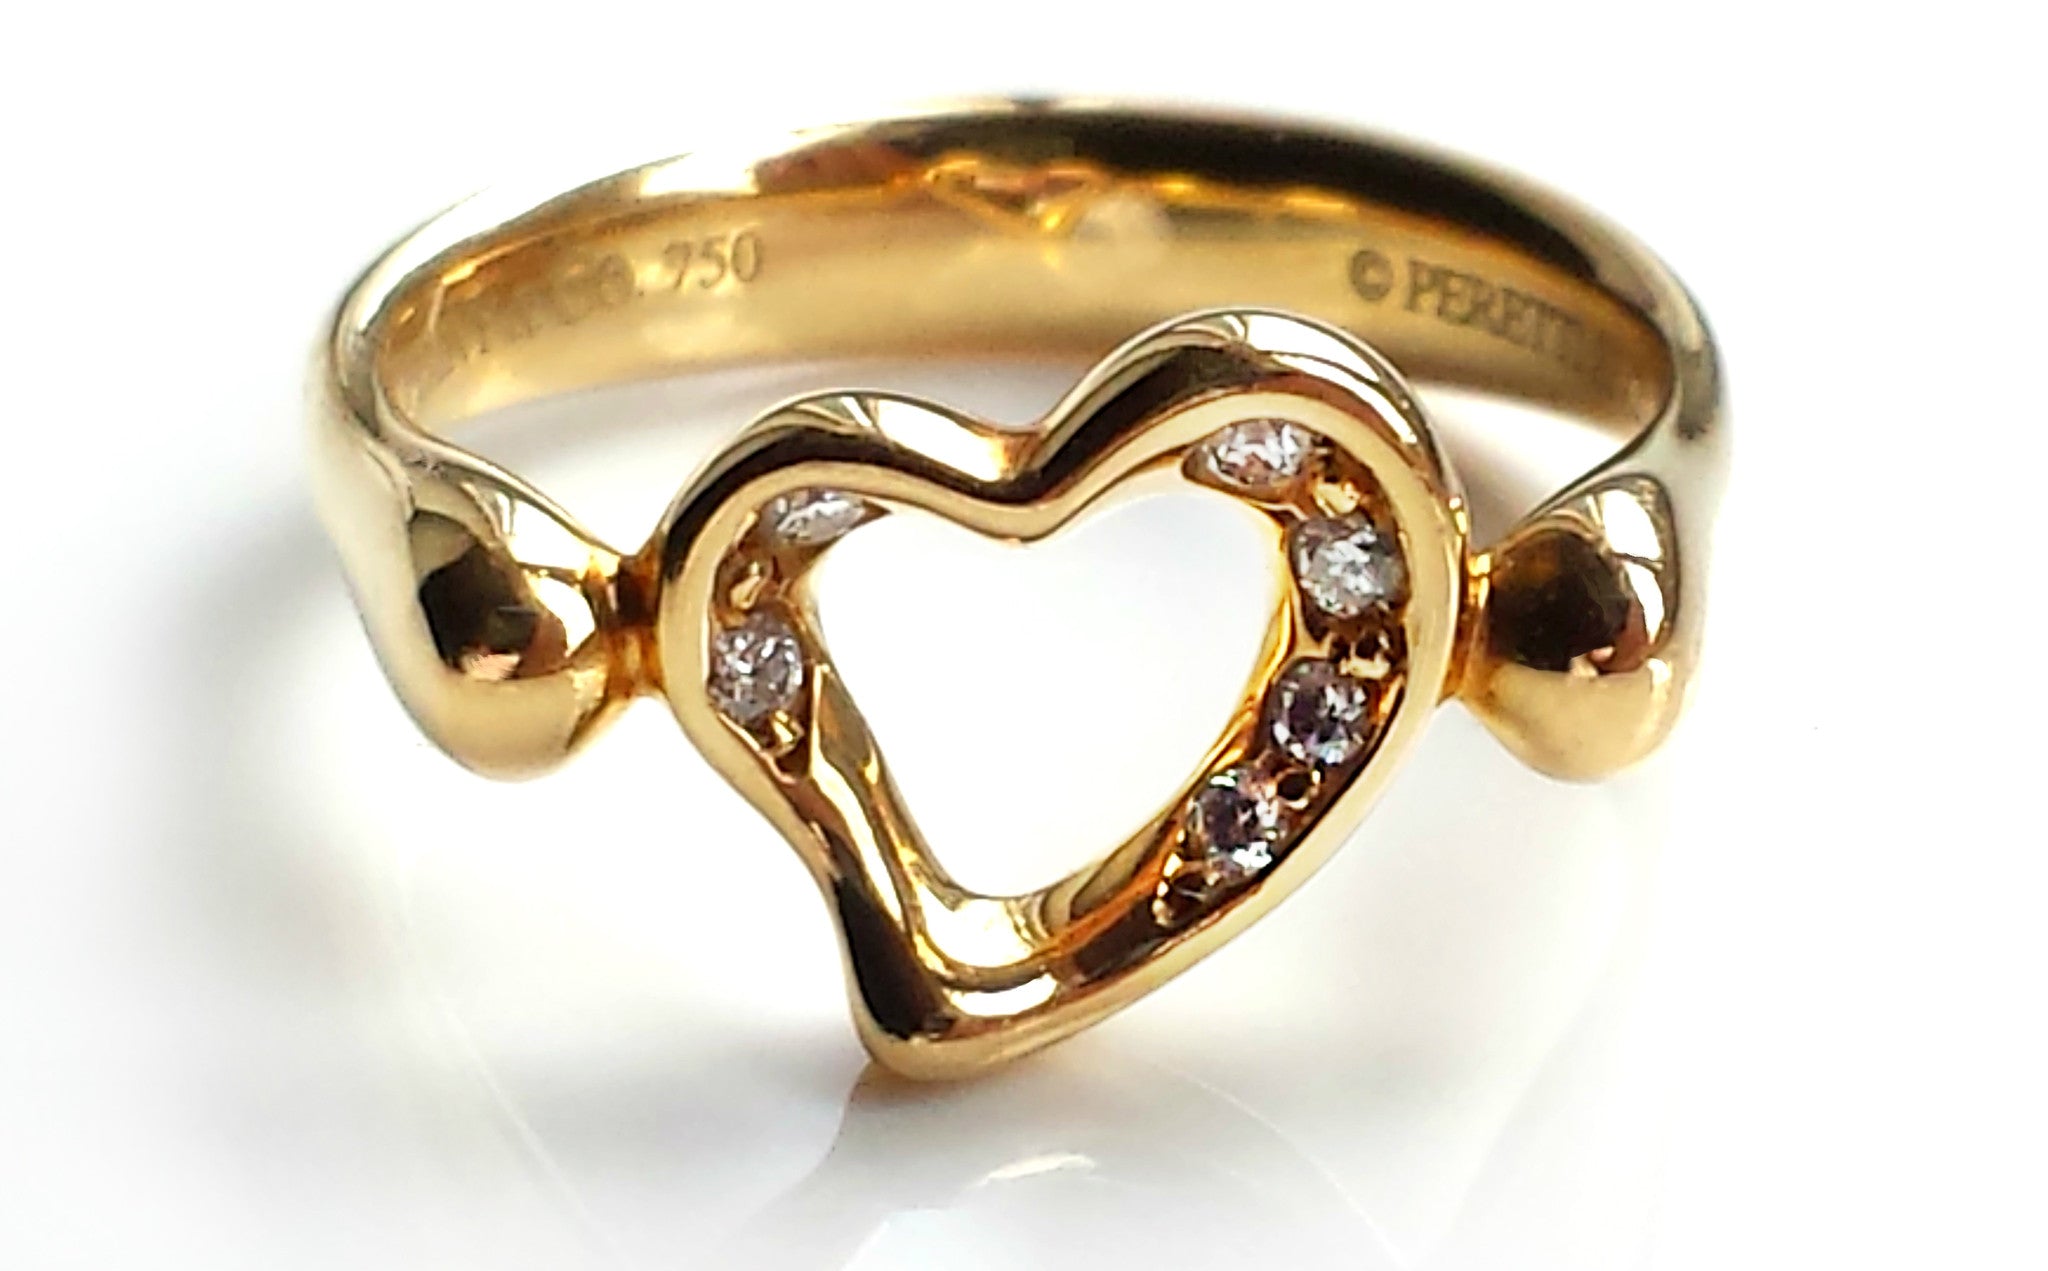 Tiffany & Co. Open Heart Ring by Elsa Peretti in 18K Yellow Gold. Size